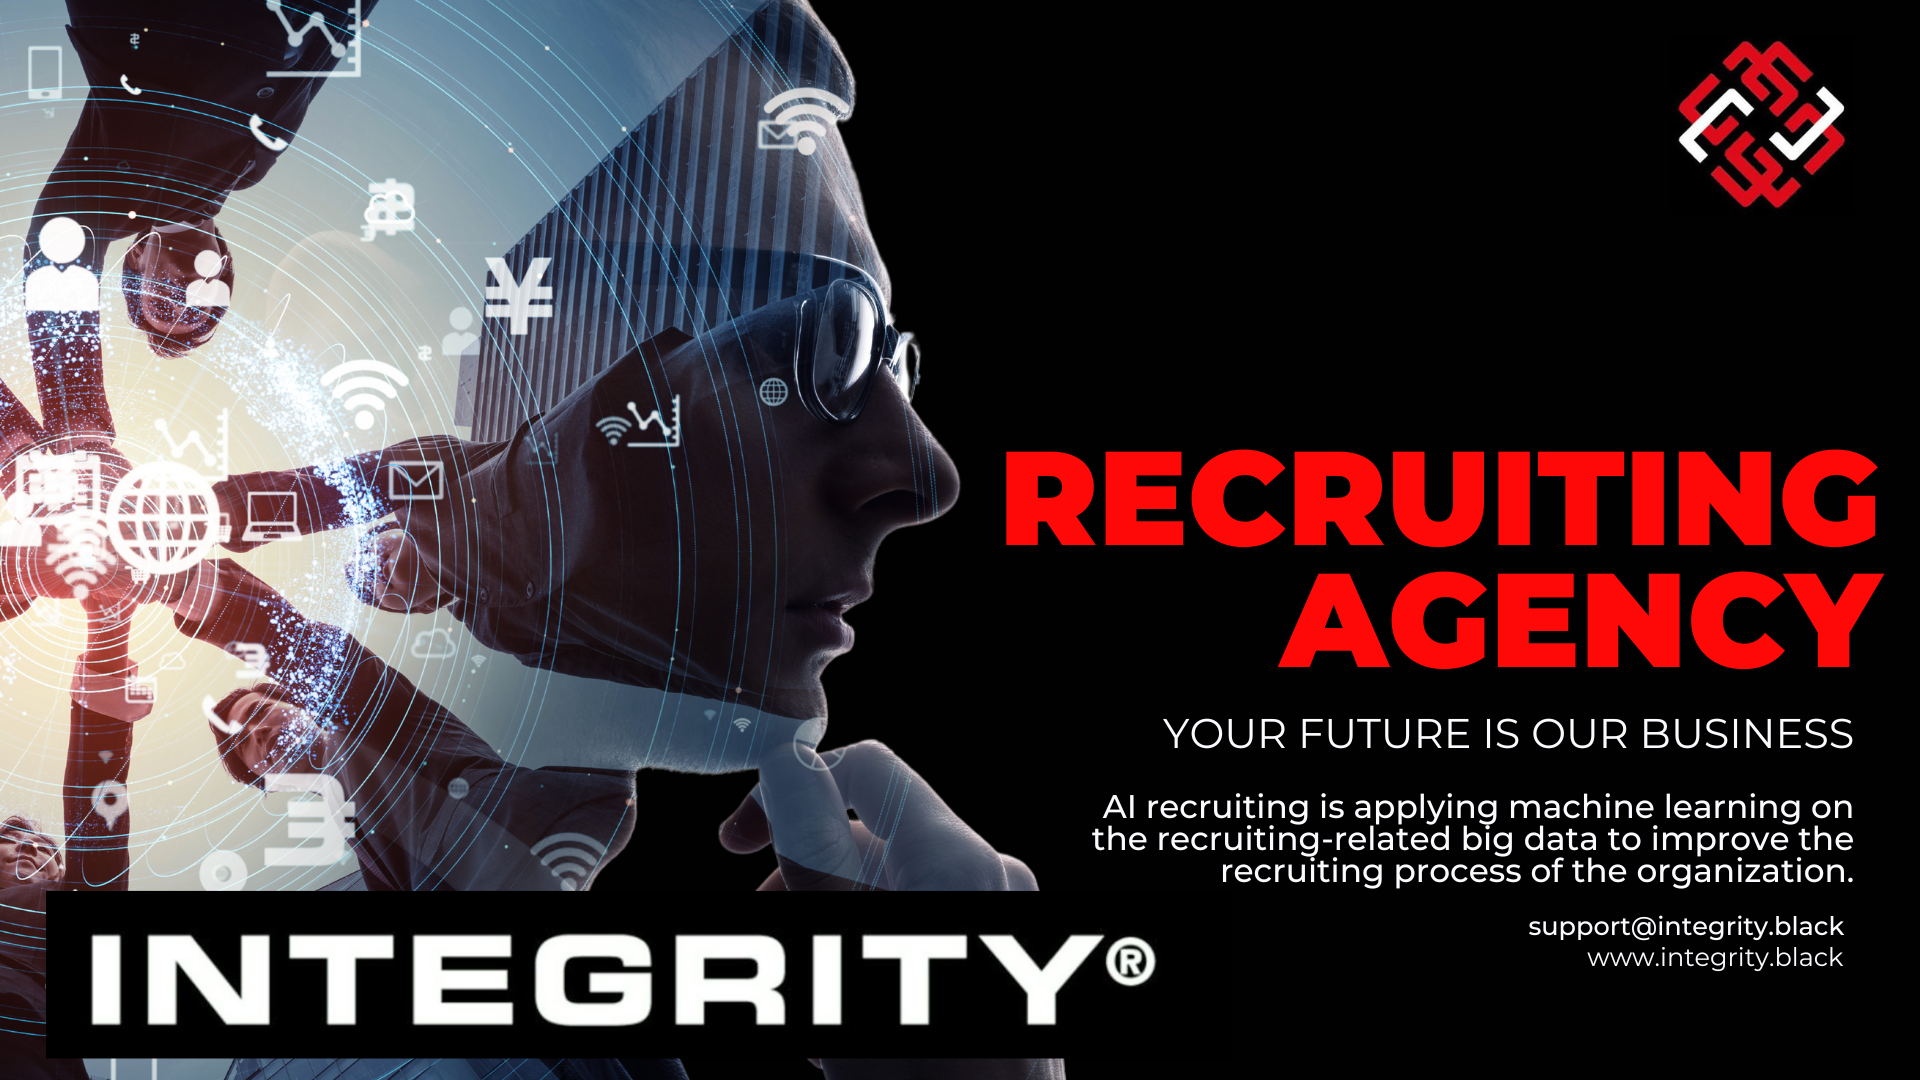 INTEGRITY RECRUITING AGENCY